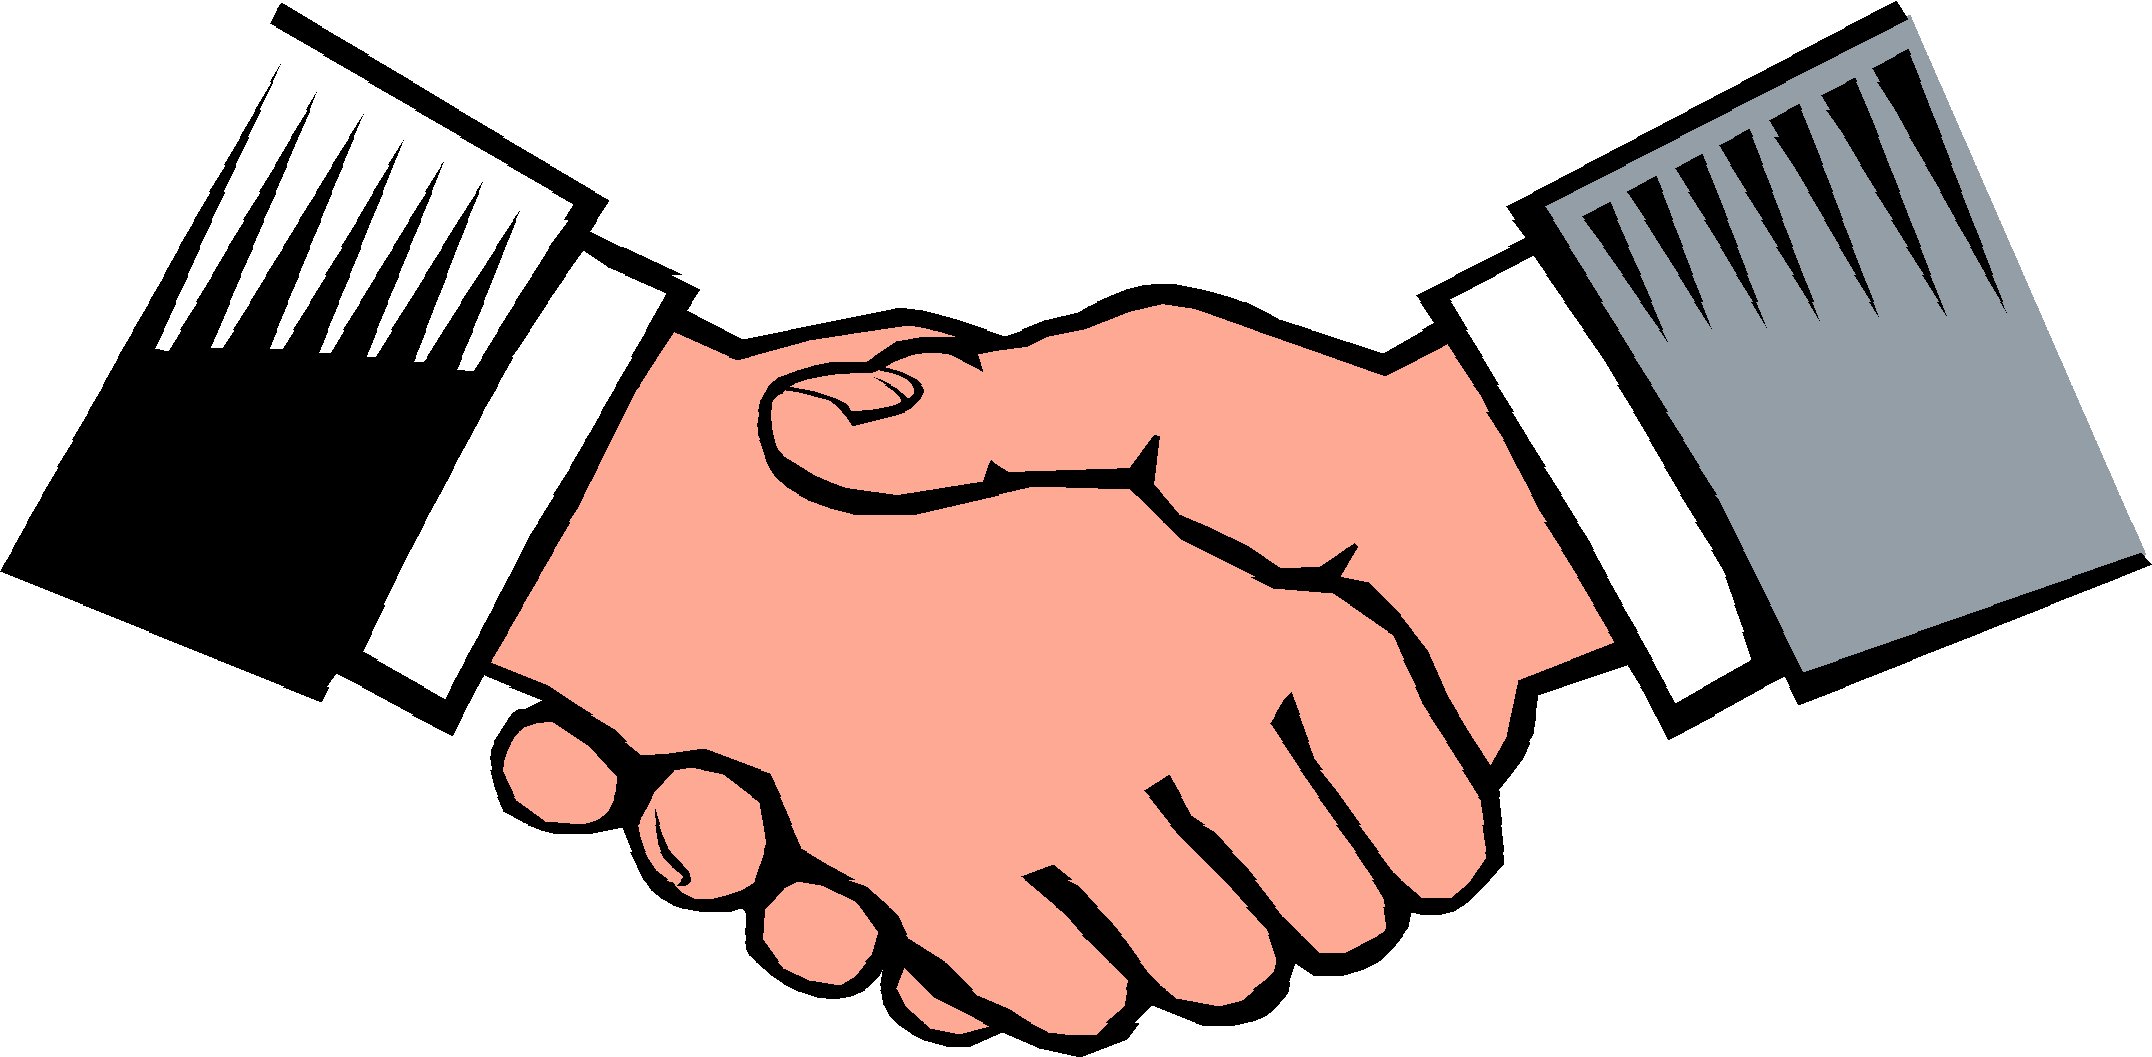 Clipart groups of people shaking hands - ClipartFox